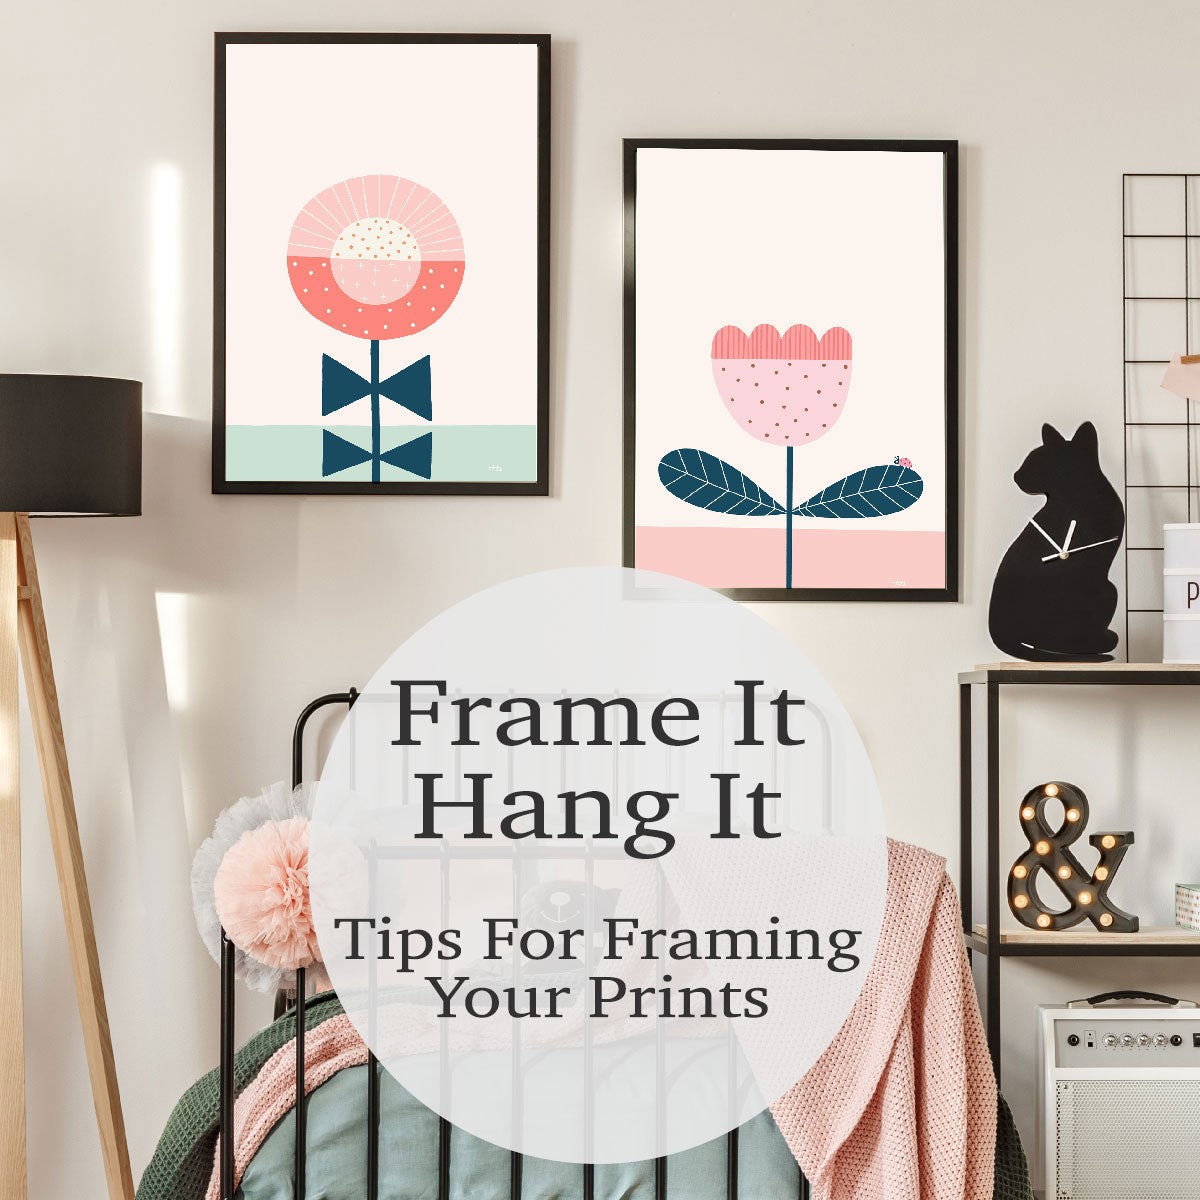 Tips For Framing Your Prints.